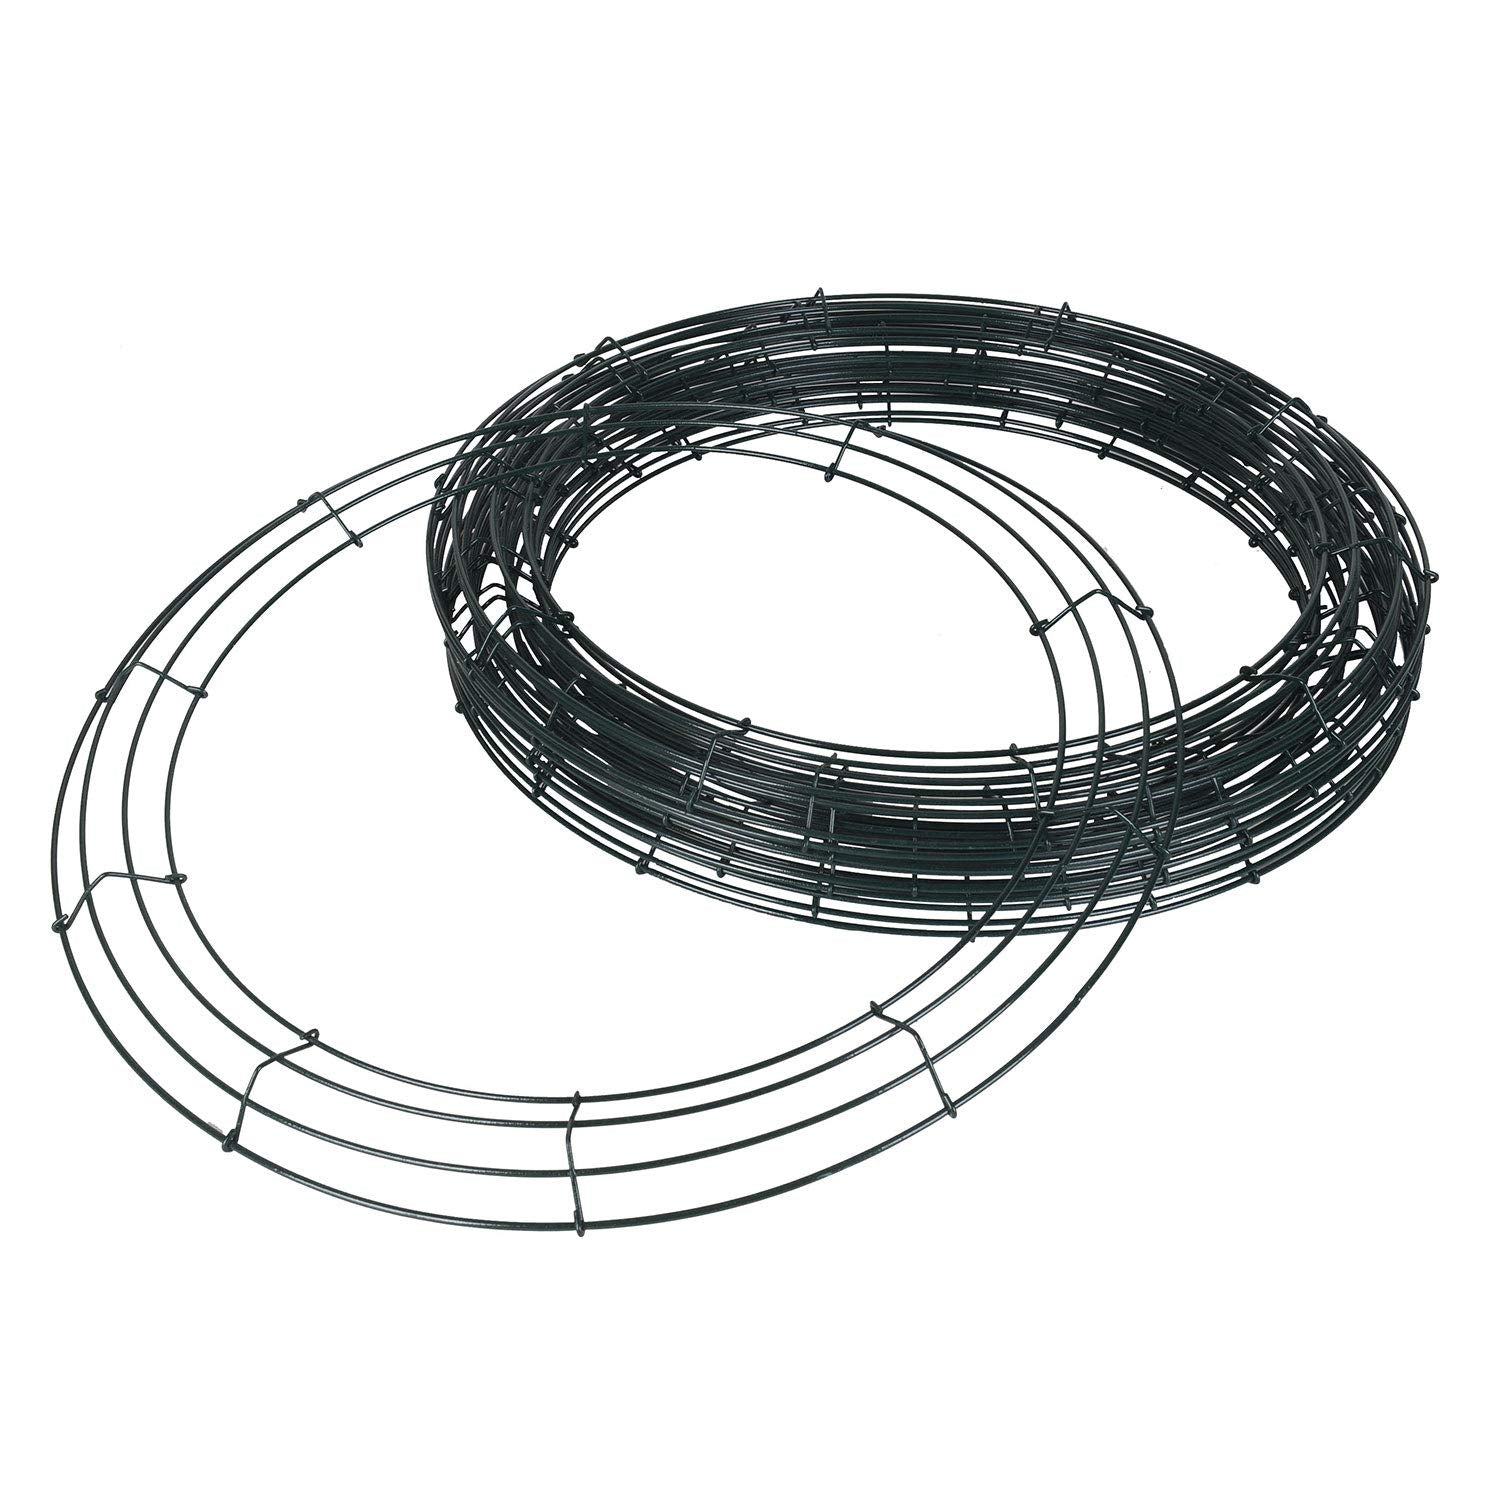 10-inch Plain Wire Wreath Form: 3 Wire Black Frames MD005202 – Michelle's  aDOORable Creations